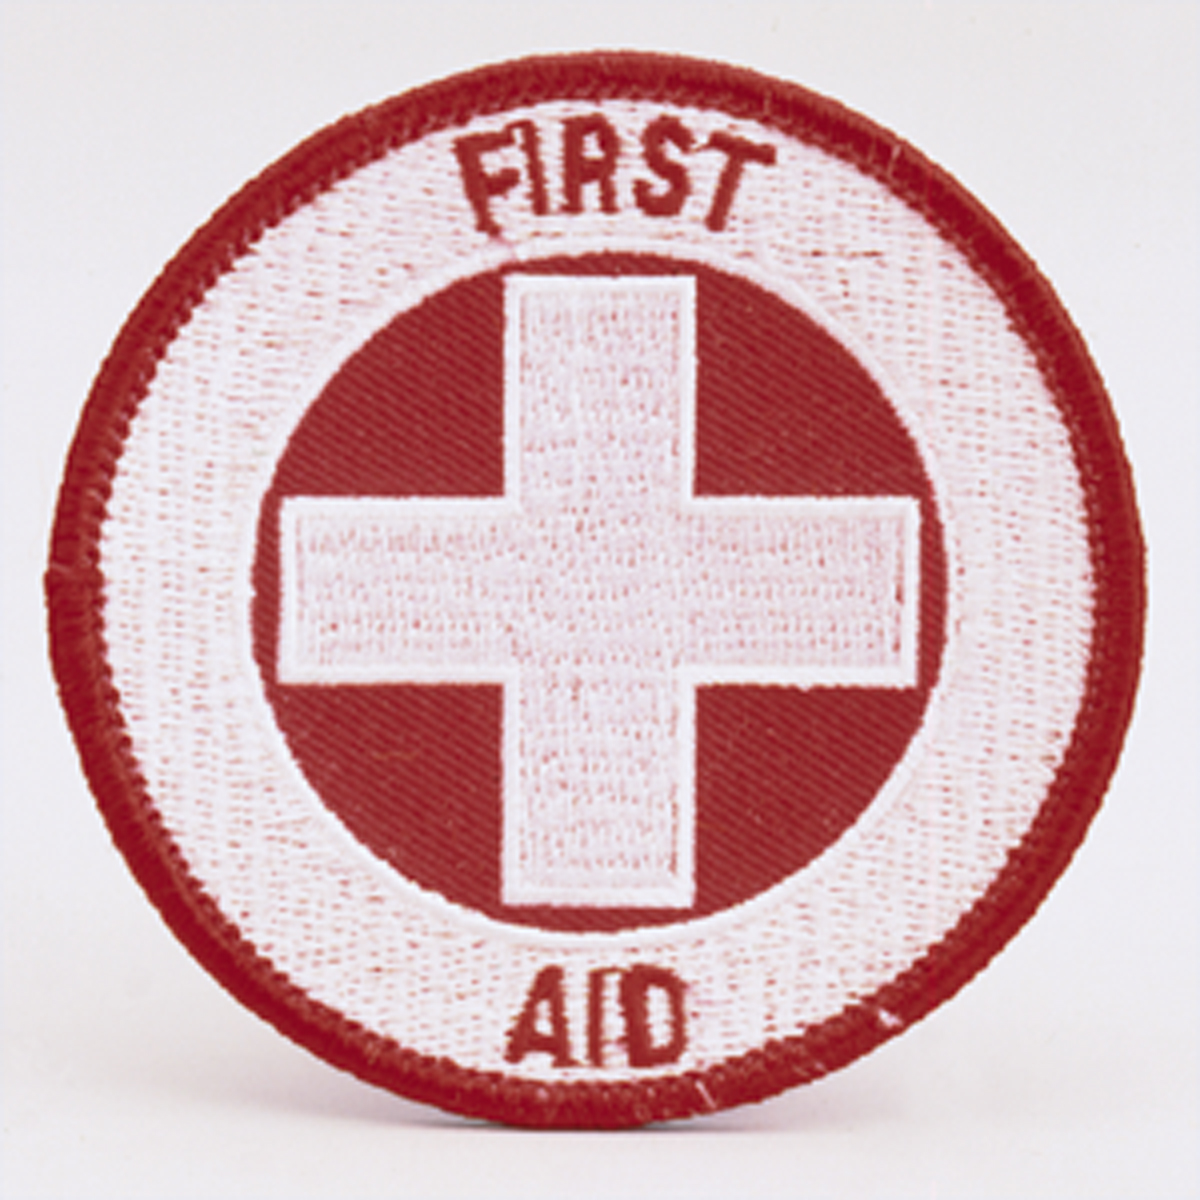 Motivation Product, Legend: FIRST AID